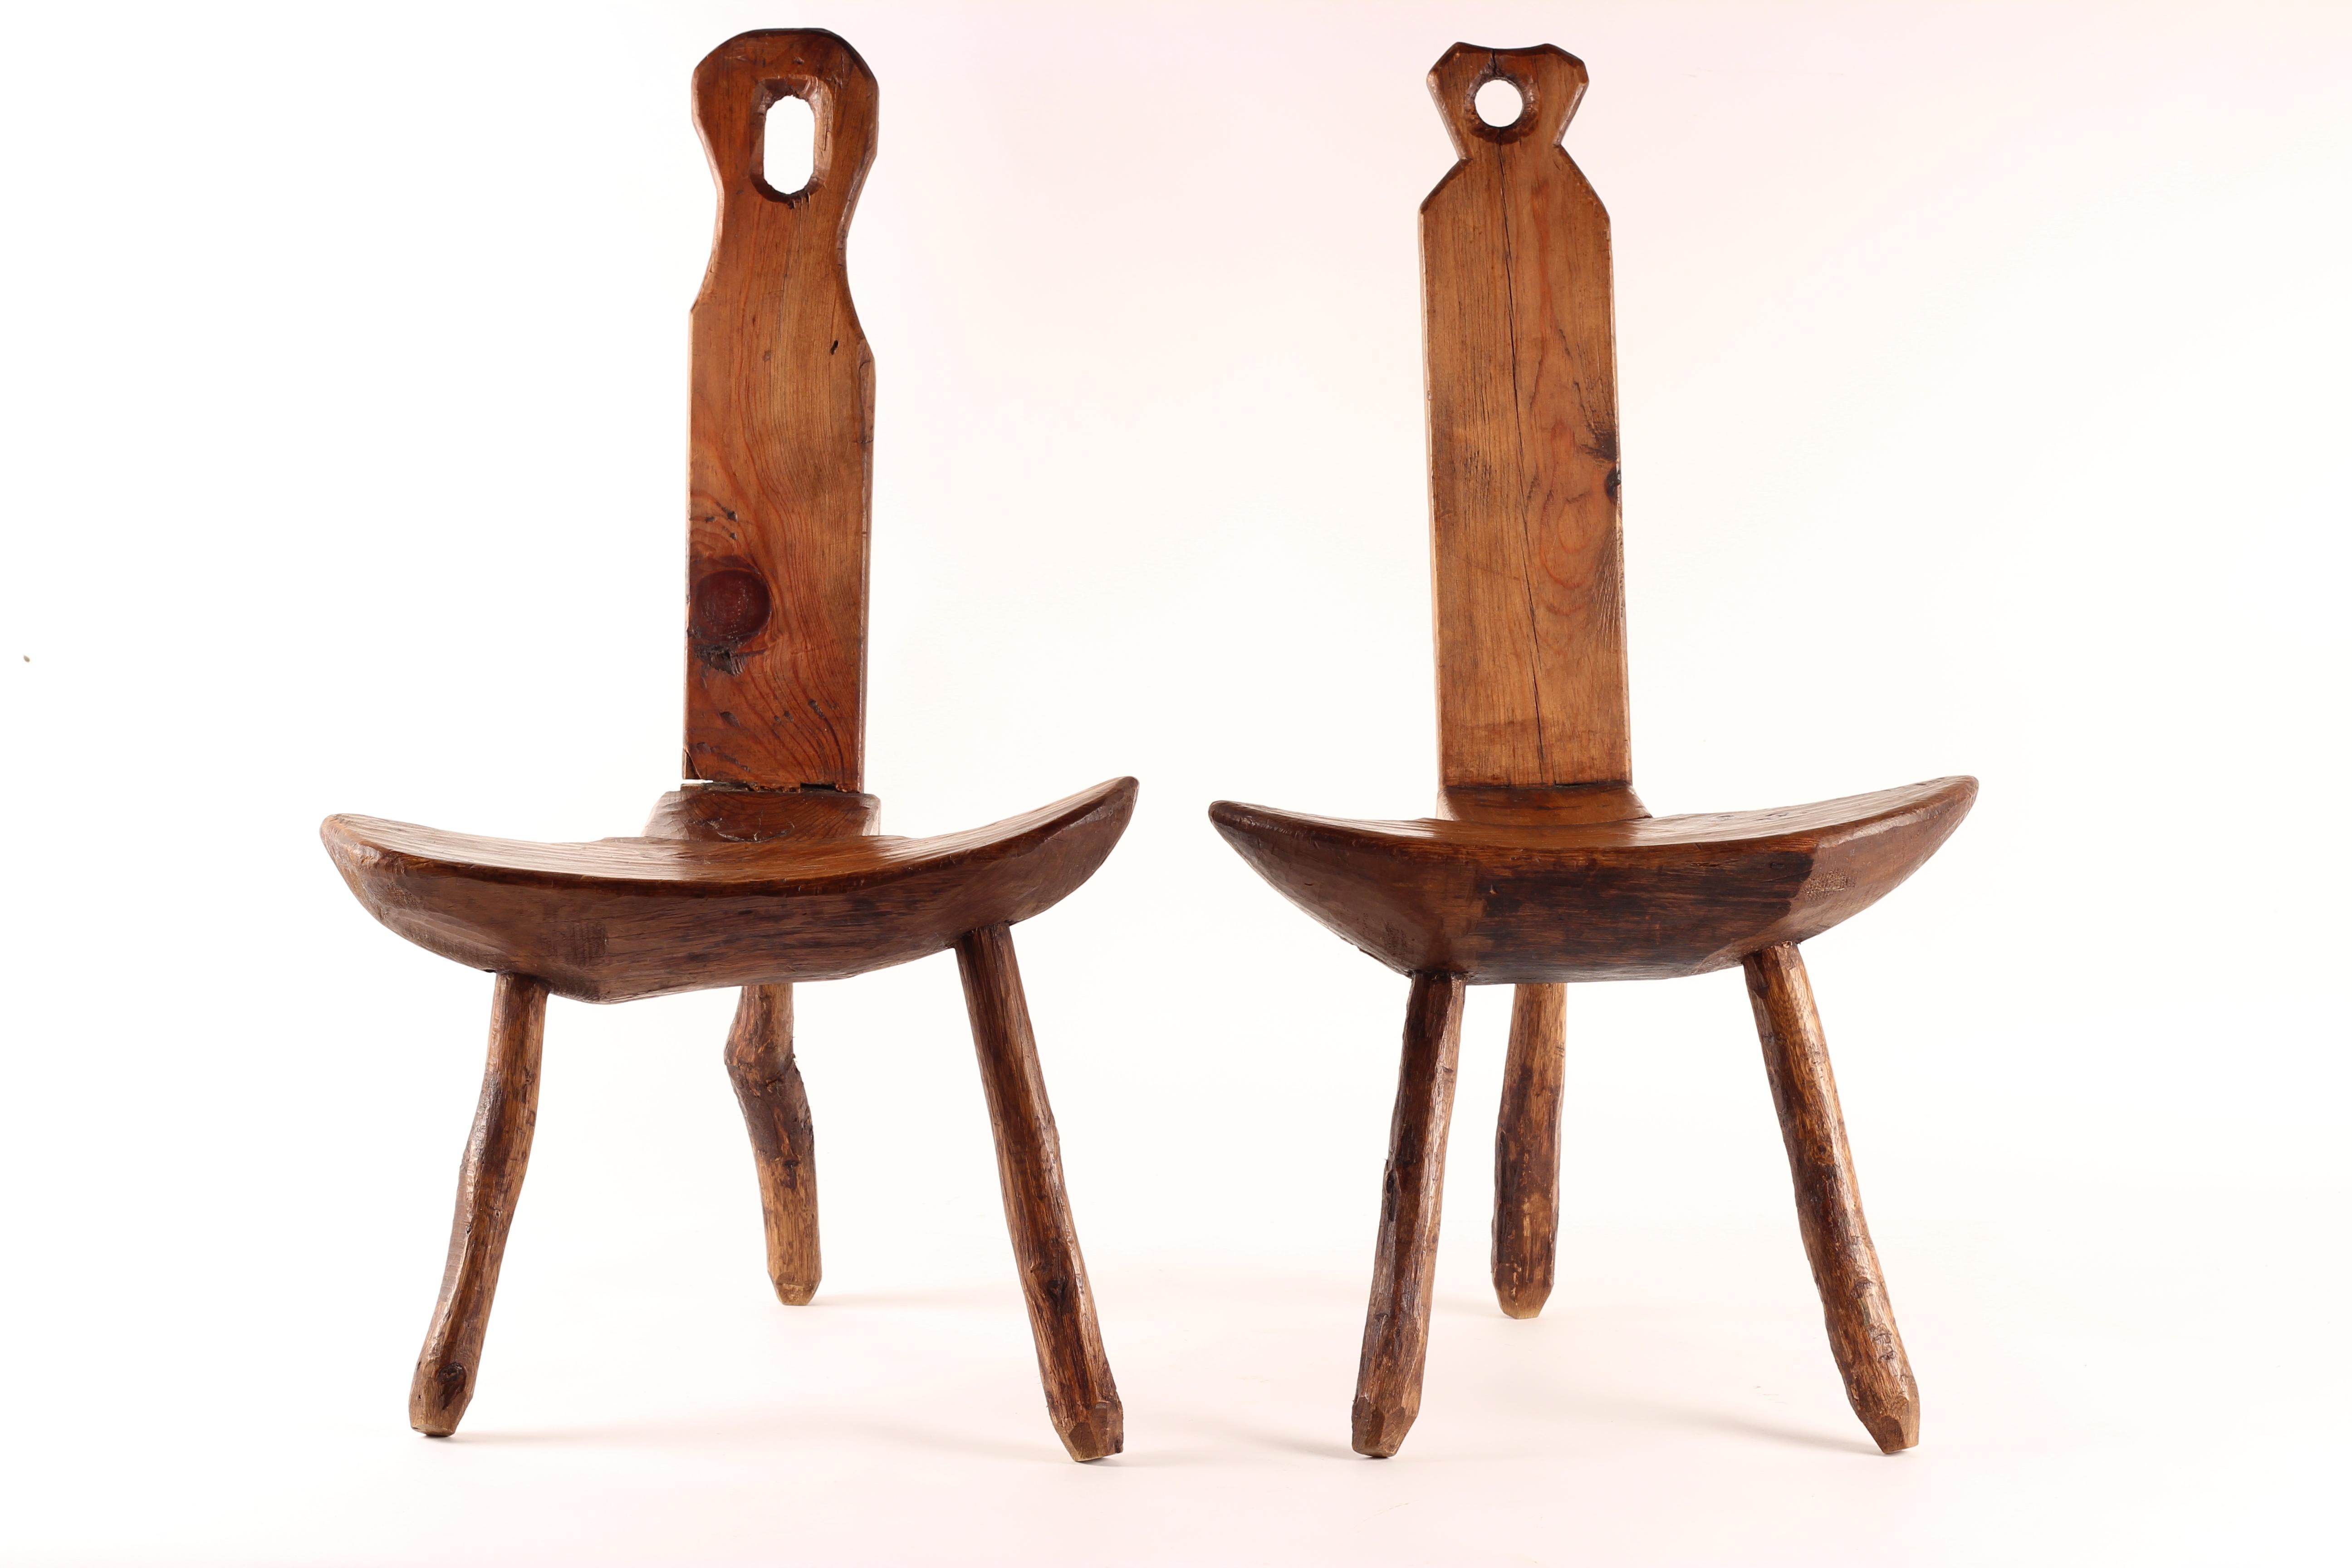 A wonderful pair of very characterful French provincial Fruitwood milking stools crafted in the 19th Century.

This pair show all the signs of Folk art craft and the simplistic and honest manor in which they have been made. They remain stable and